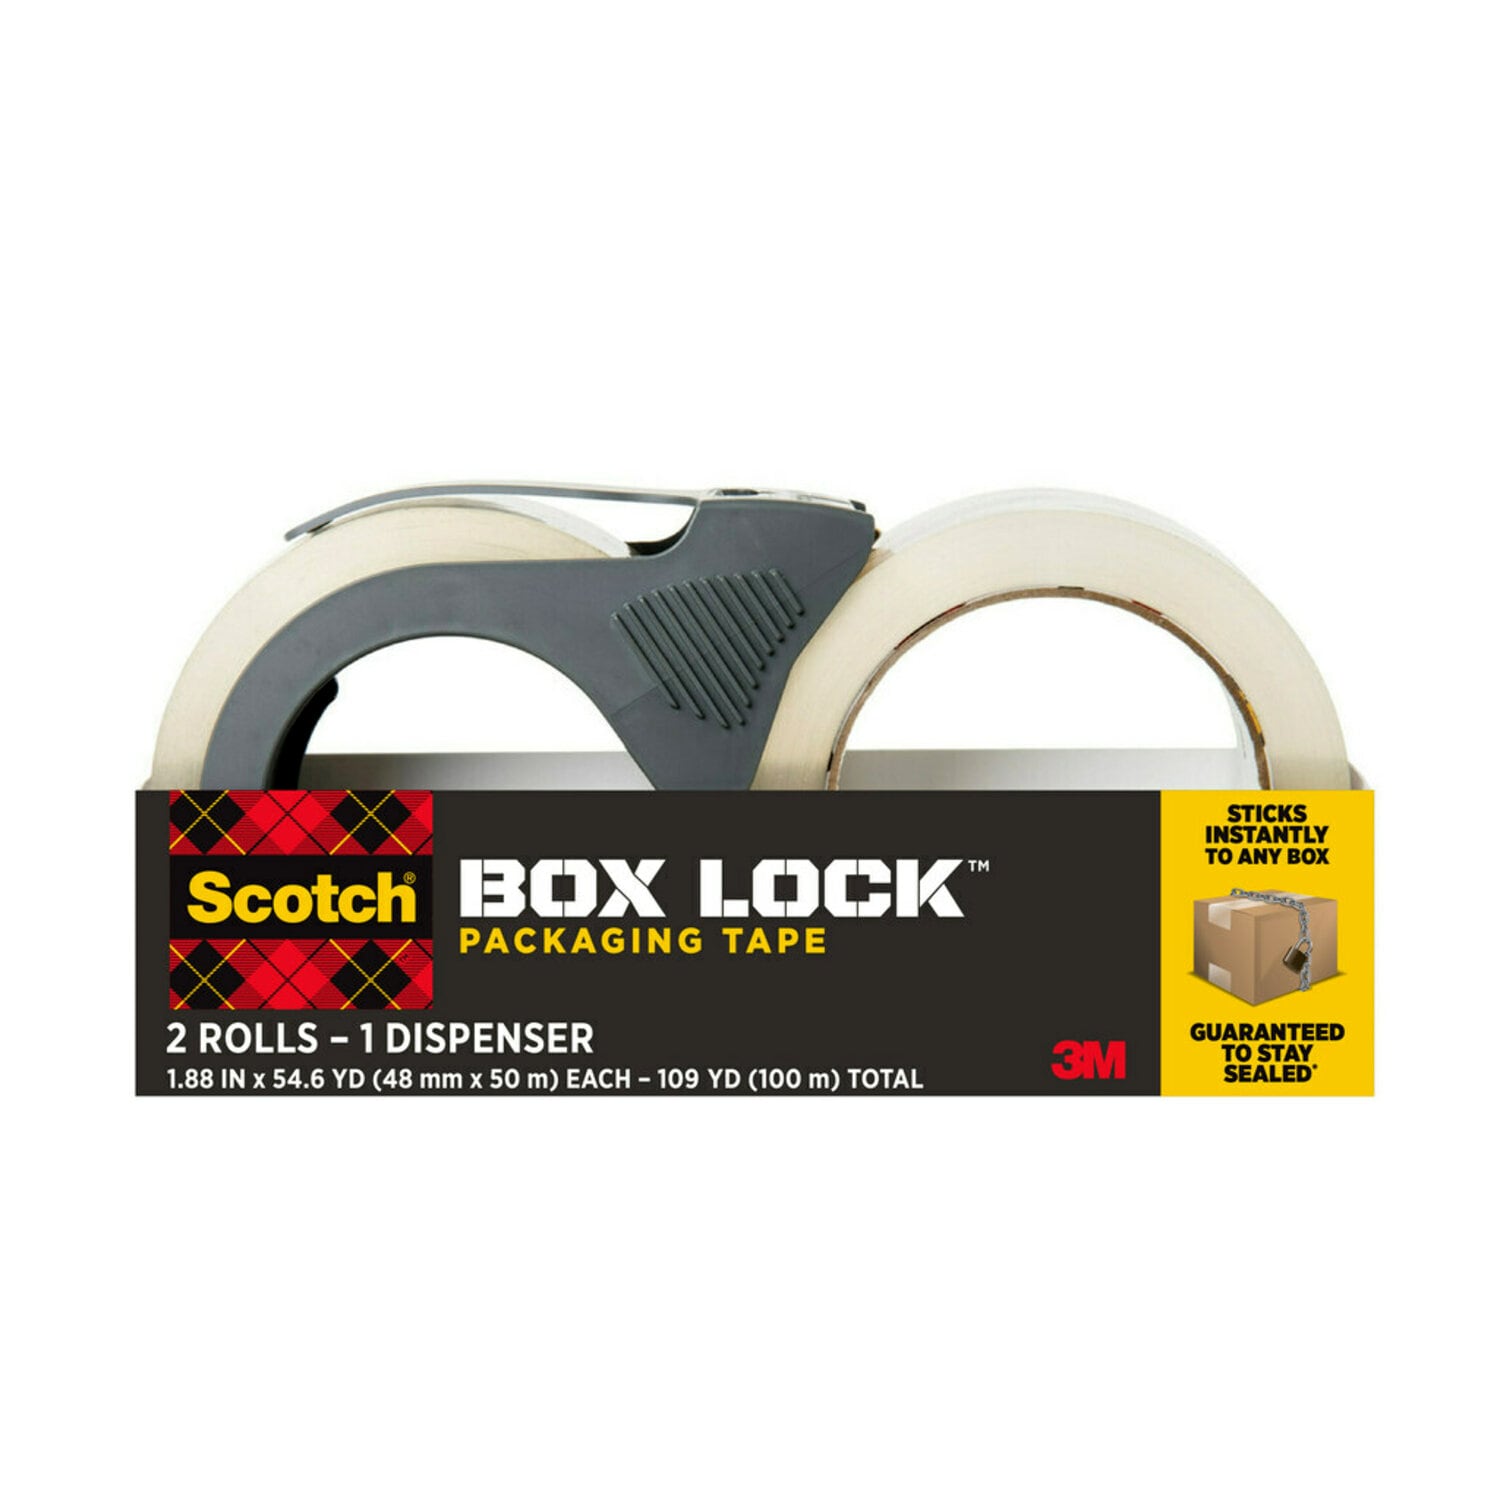 7100260763 - Scotch Shipping Packaging Tape 3950-21RD-6WC, 1.88 in x 54.6 yd (48 mm x 50 m), 2 Rolls with Dispenser